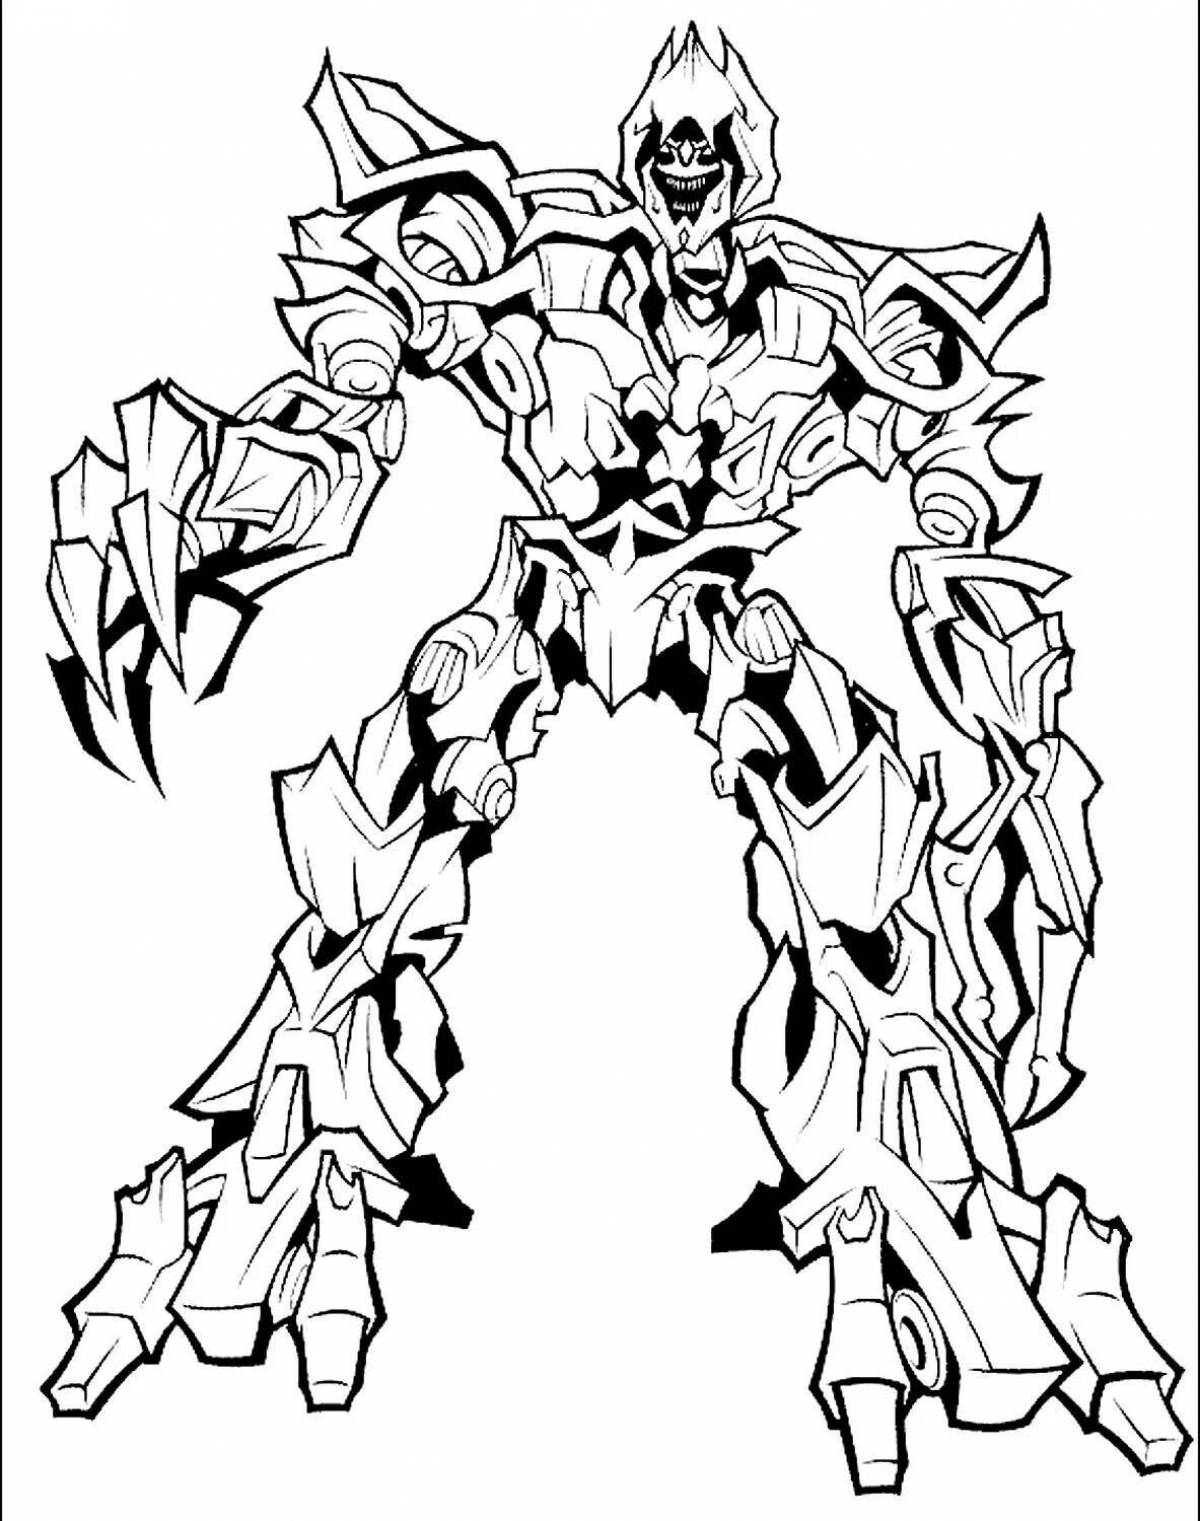 Megatron brightly colored coloring page